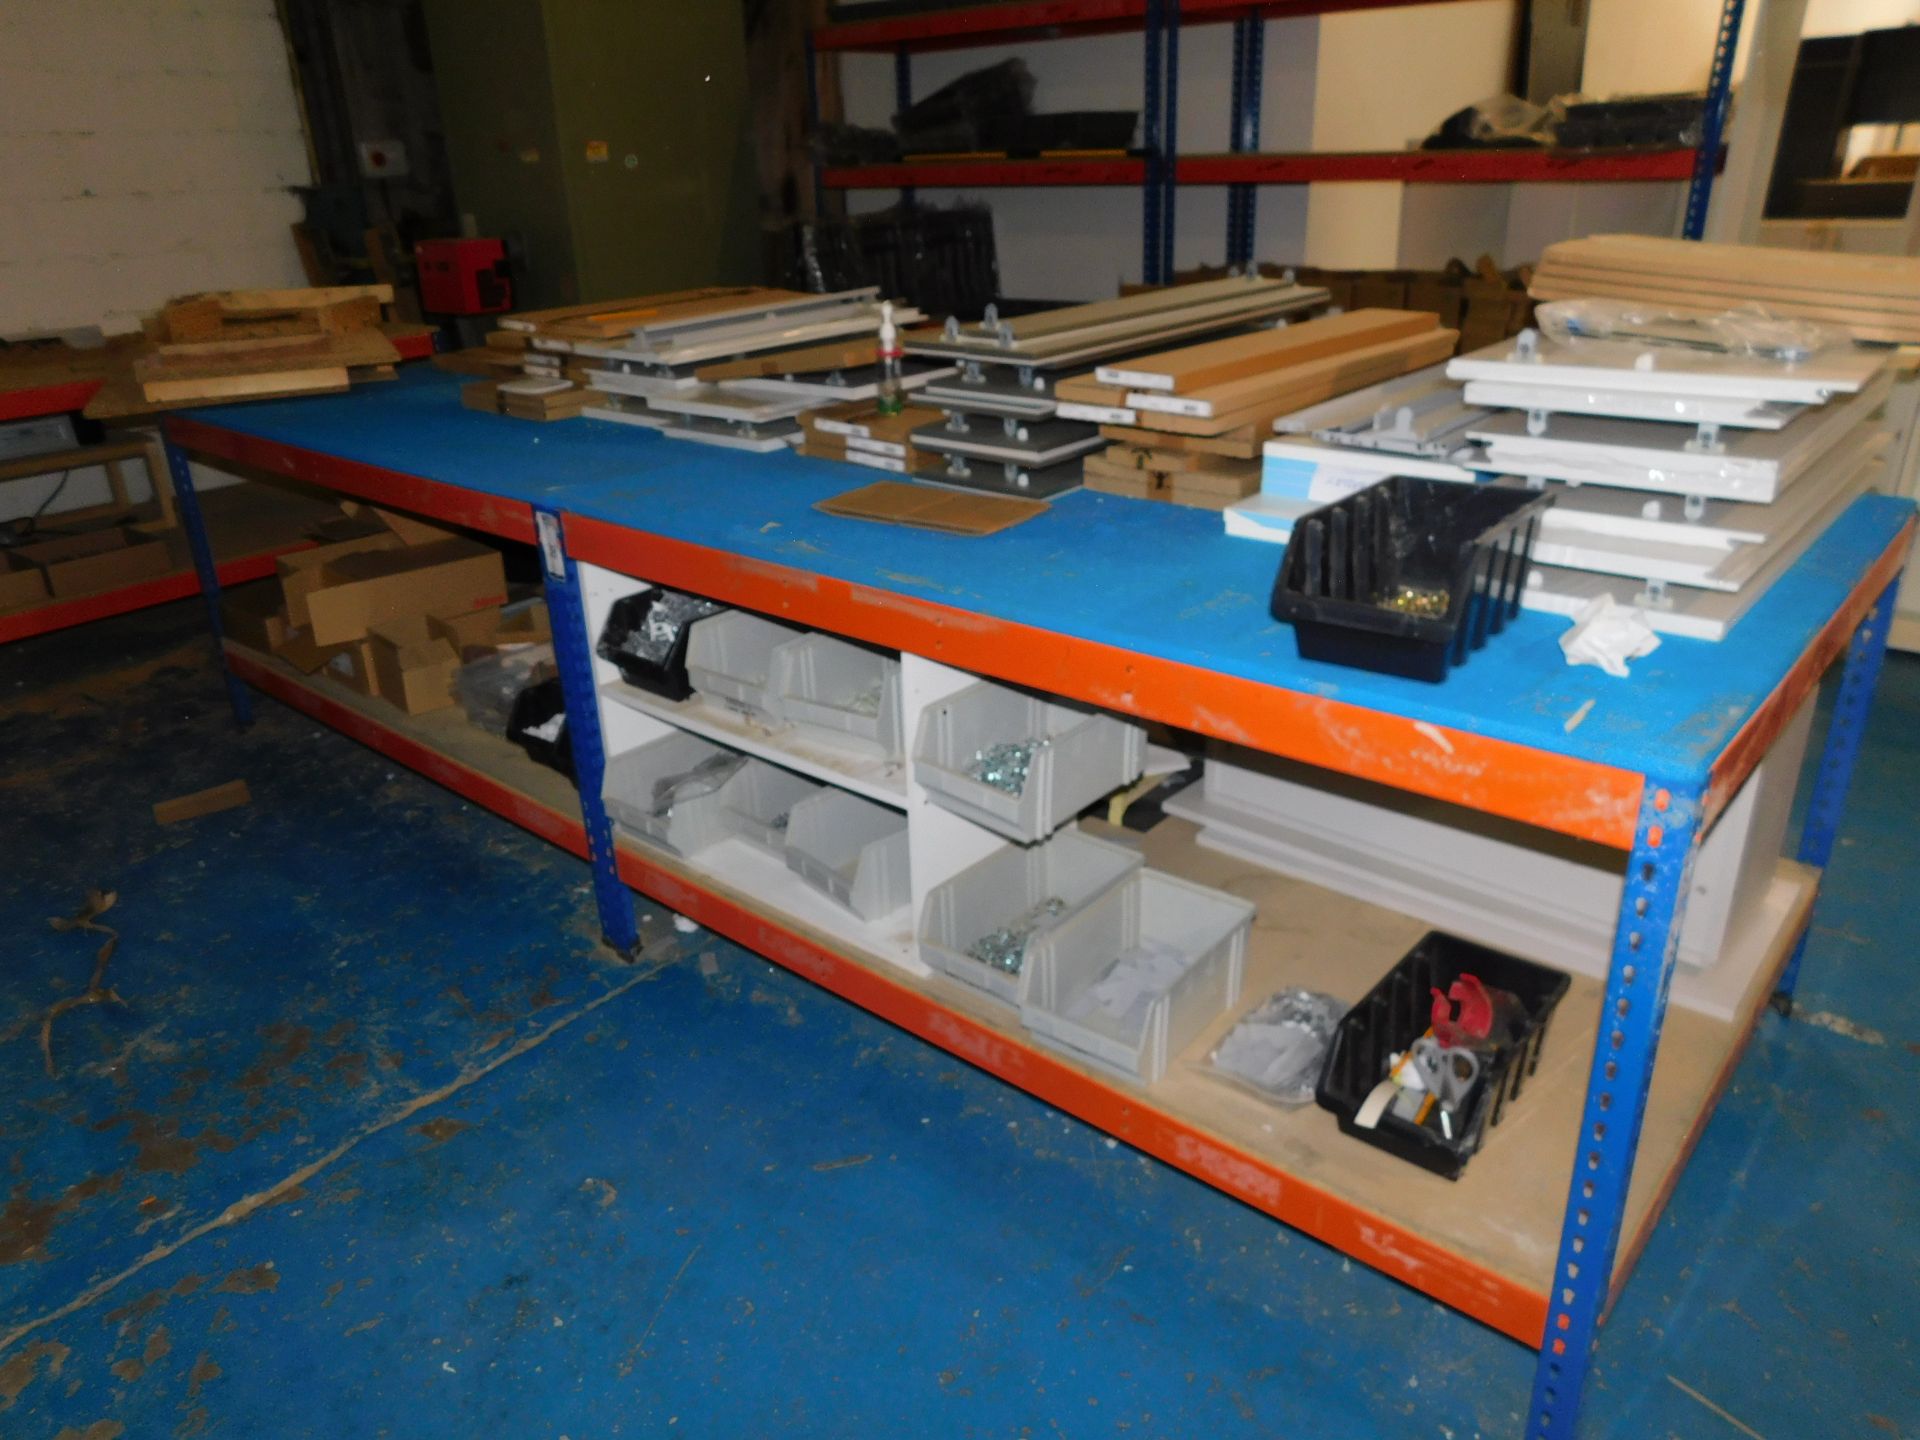 2 Boltless Work Benches (Location Walsall. Please Refer to General Notes)